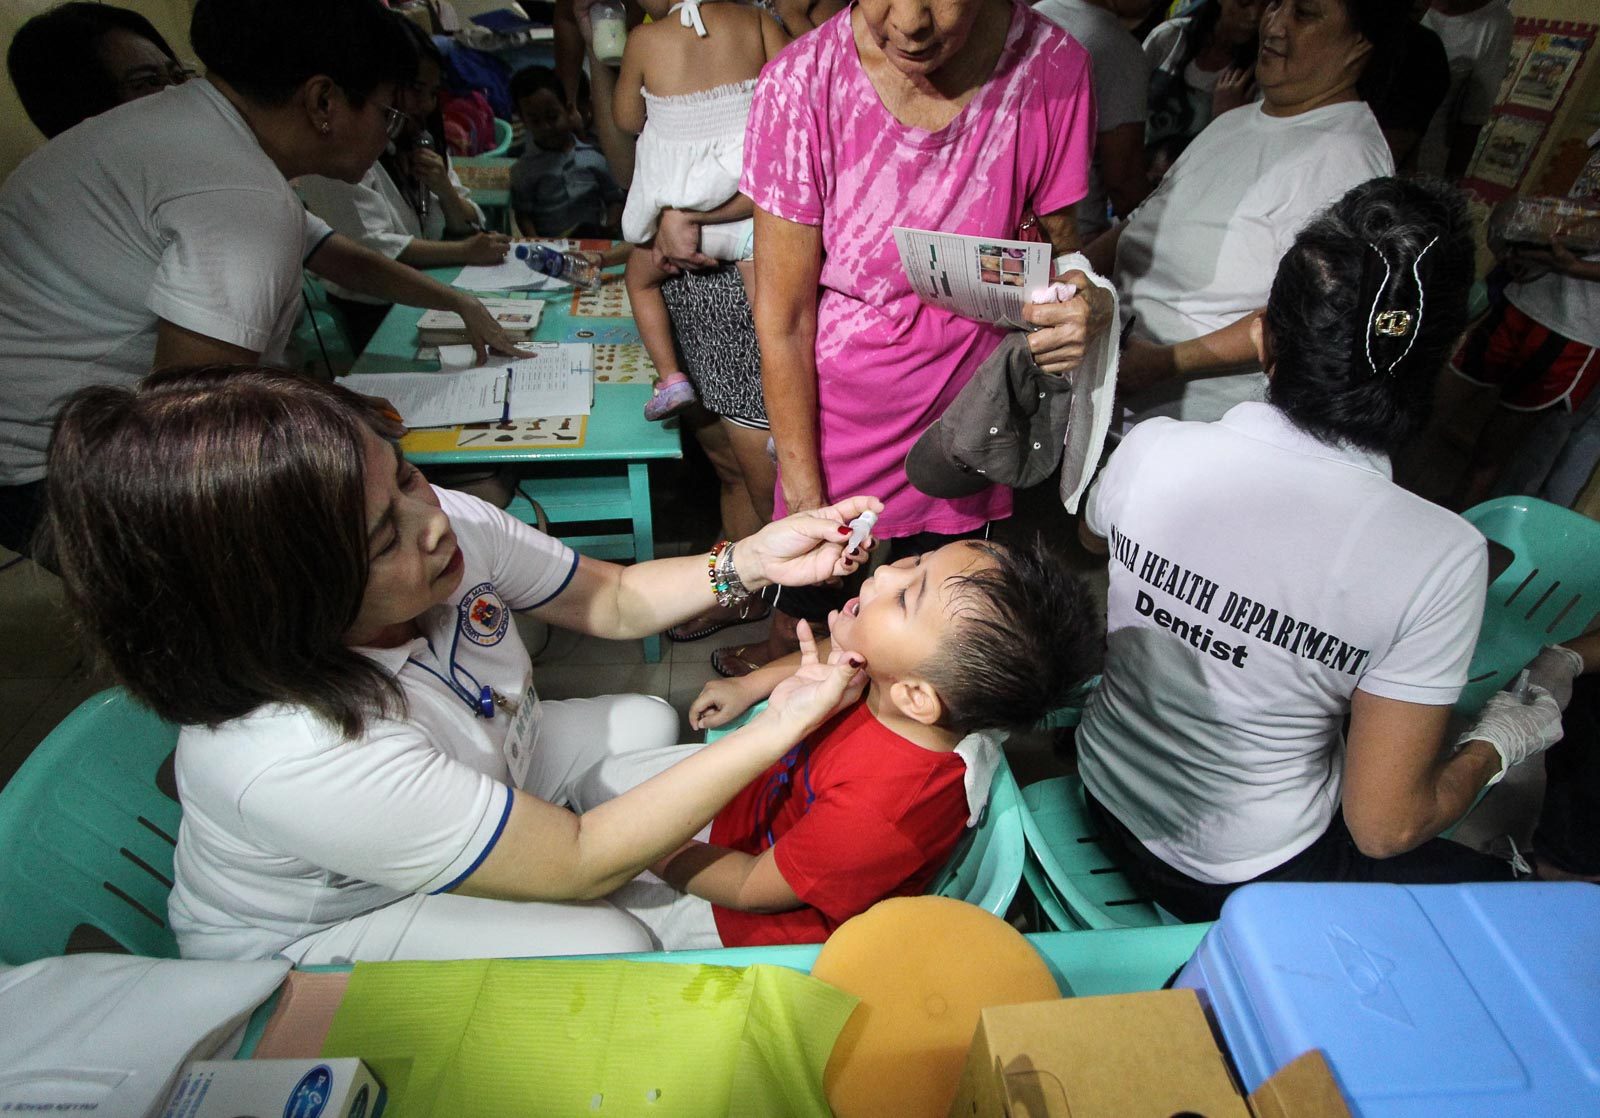 DOH confirms 4th case of polio in the Philippines